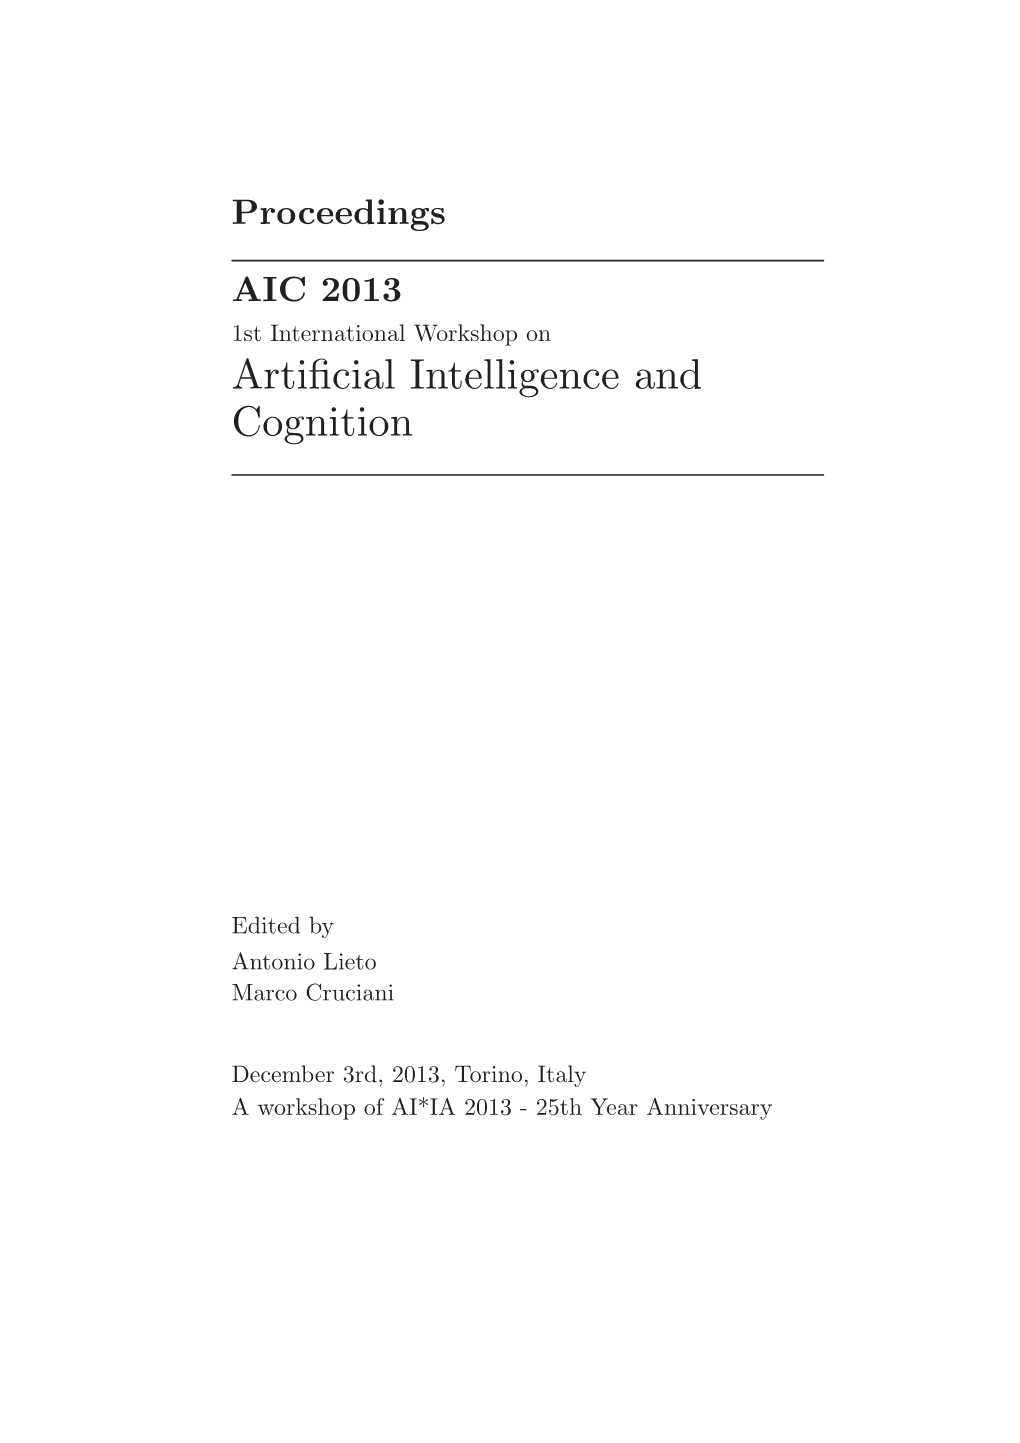 Artificial Intelligence and Cognition